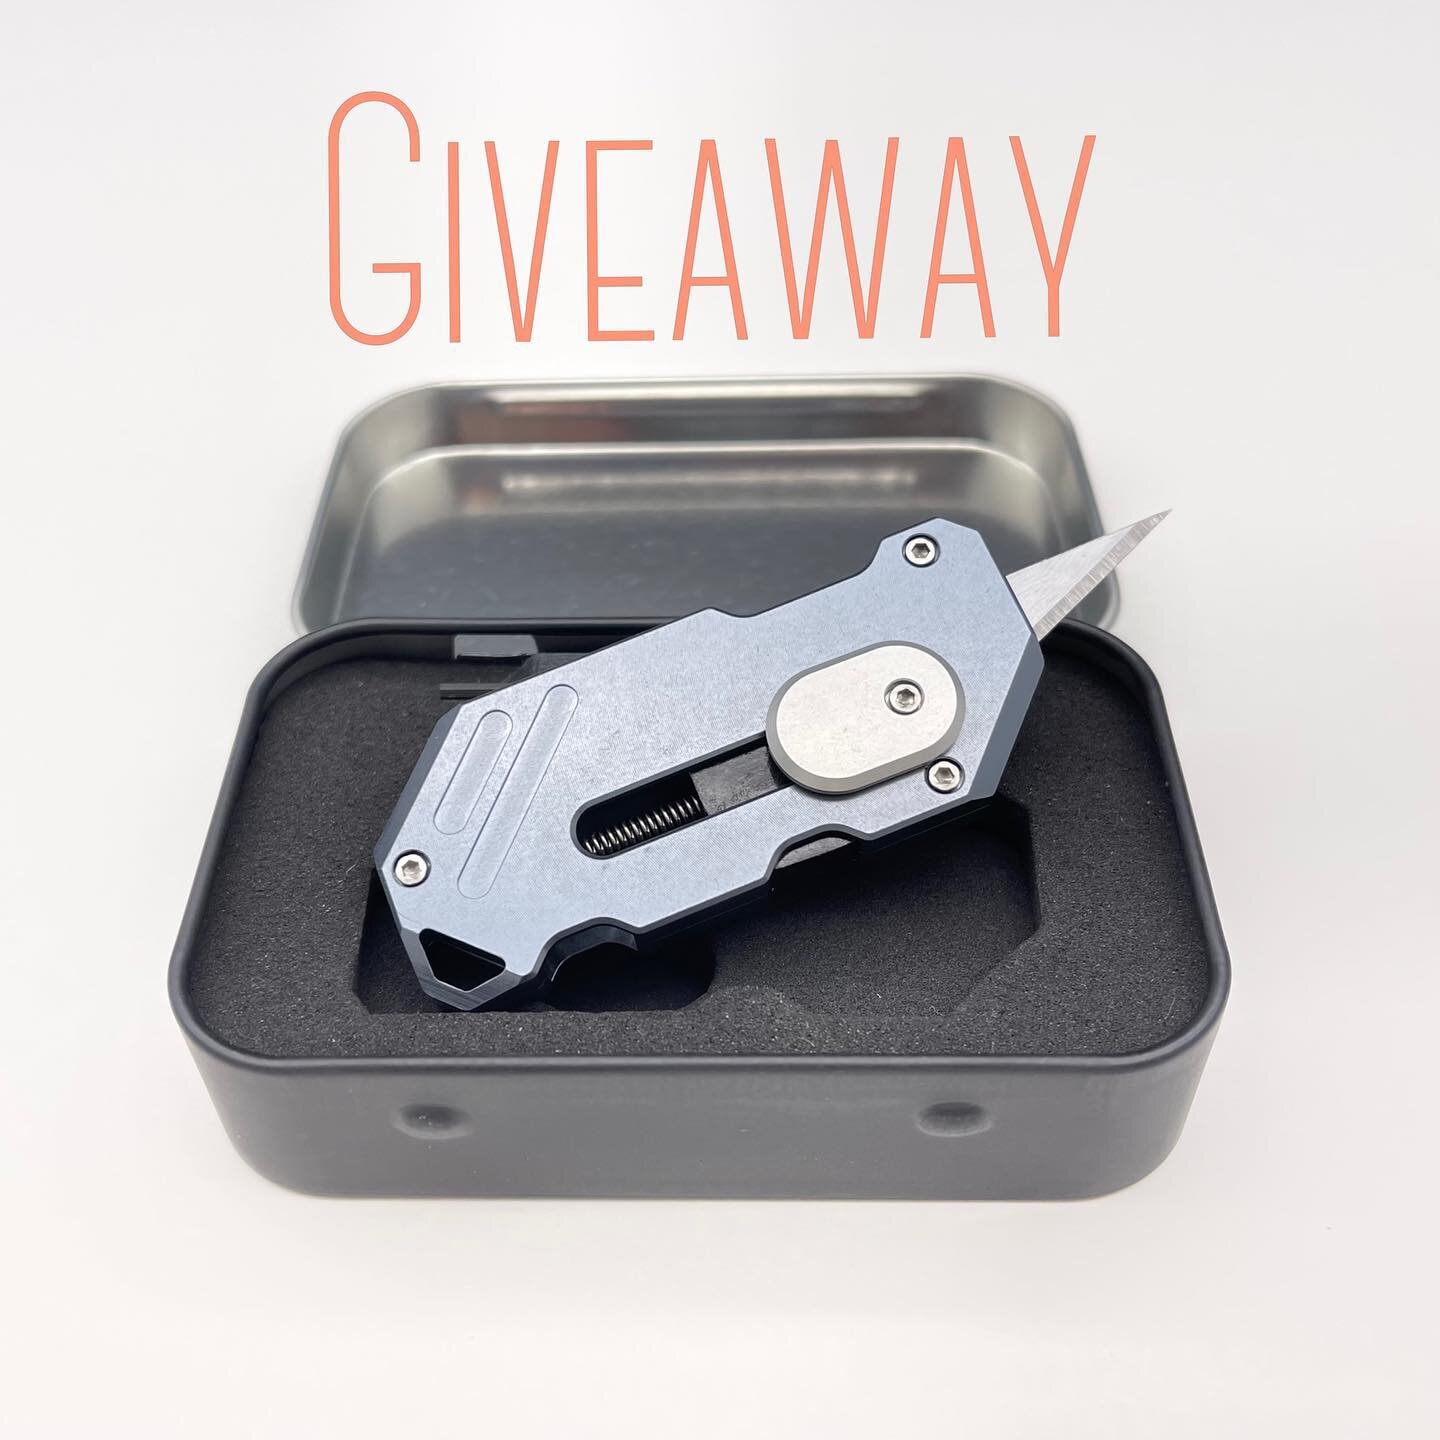 HOW TO ENTER:
1. Make sure to follow us @fluxengineering if you&rsquo;re not already.2. Tell us in the comments below what you think our next product should be.
3. Tag two maker friends, and help @fluxengineering grow!
4. If you tag double, you get a